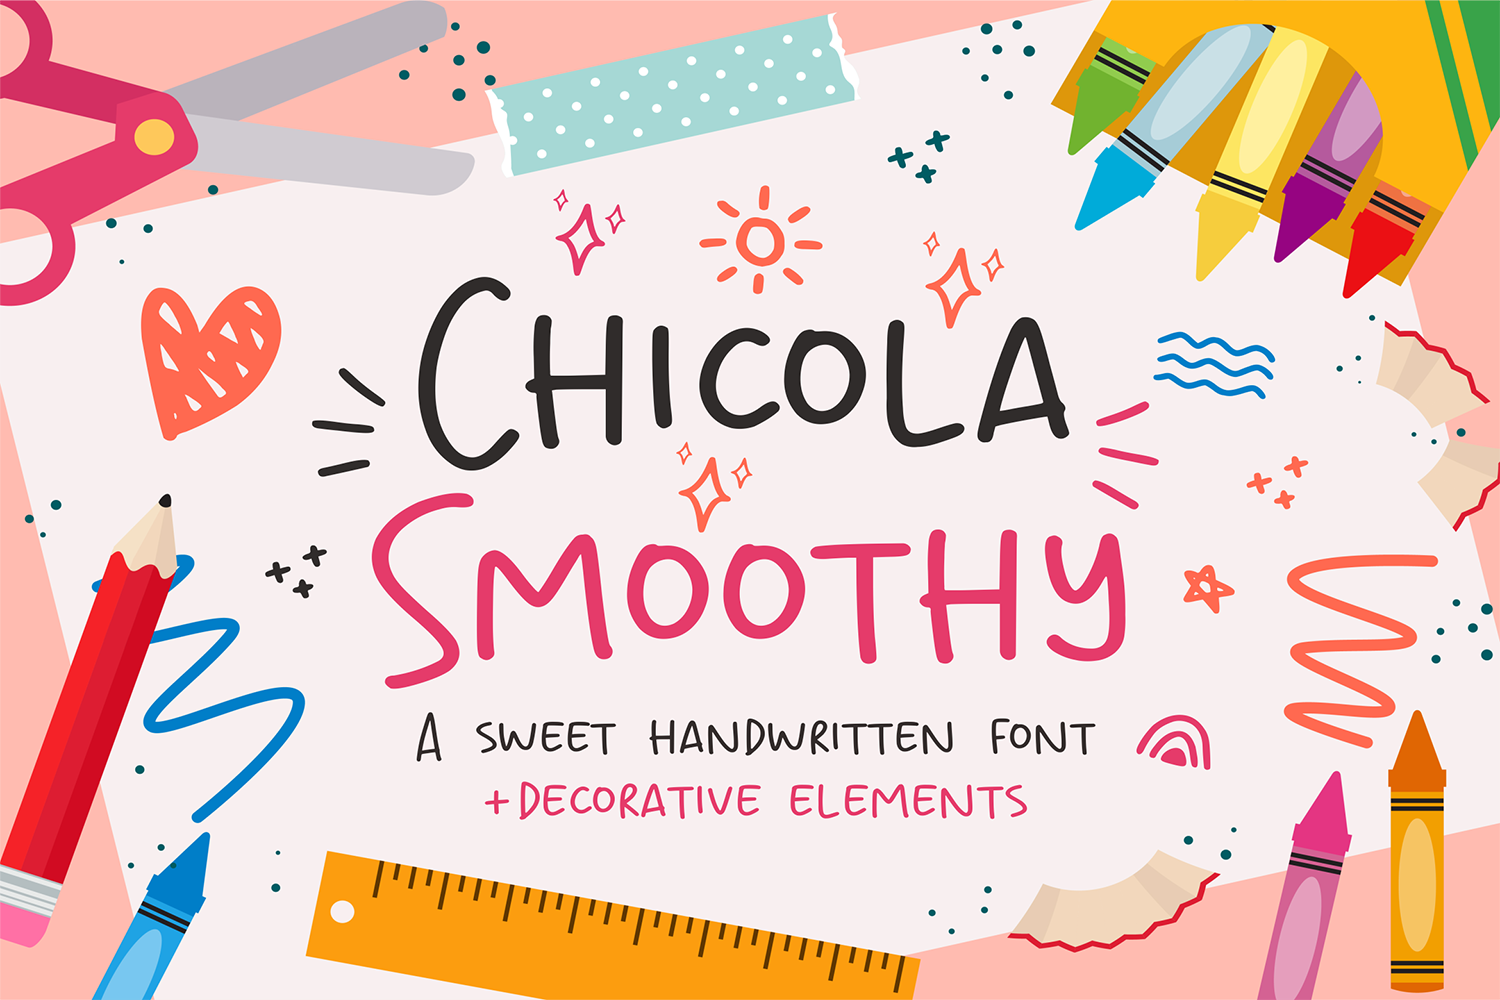 Chicola Smoothy Free Font